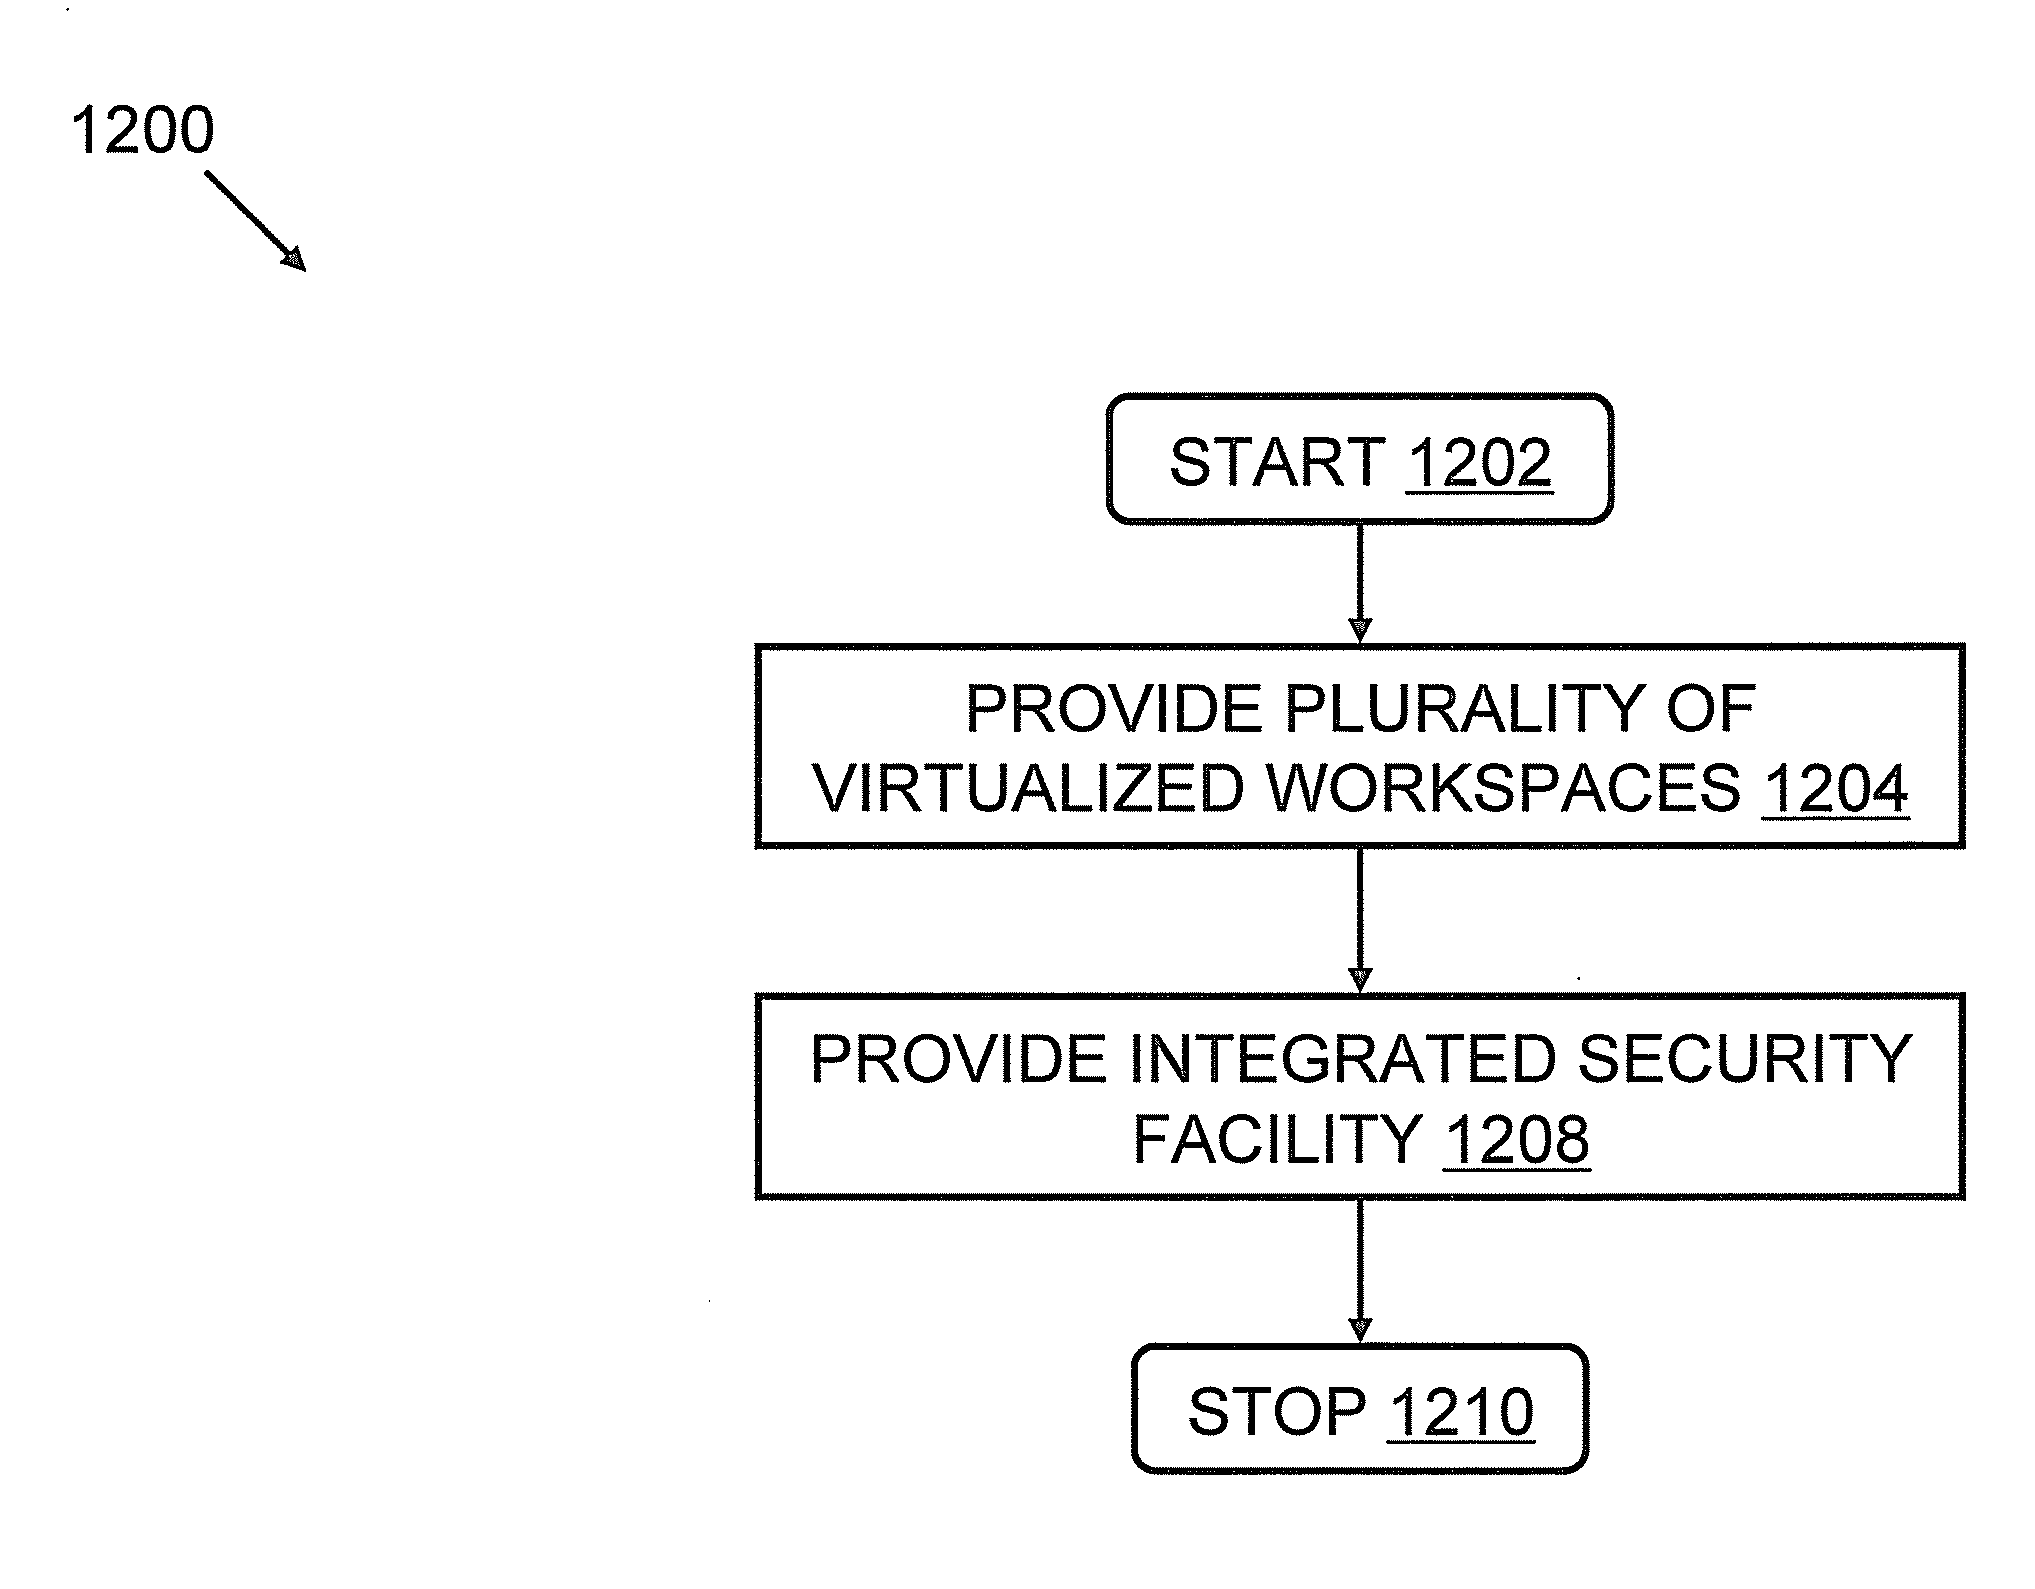 Running Multiple Workspaces on a Single Computer with an Integrated Security Facility